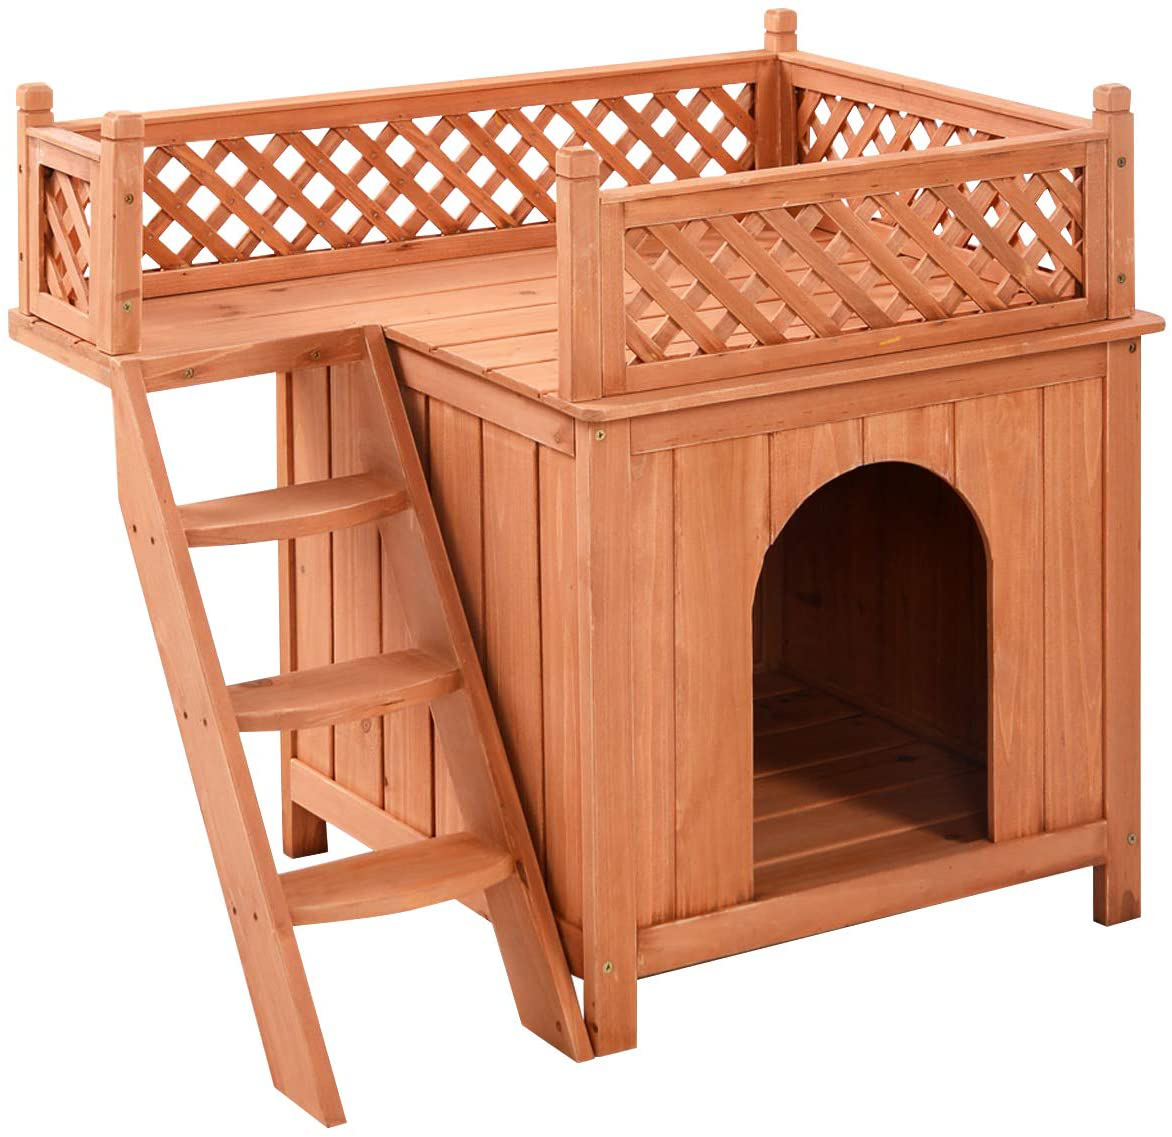 PETSITE Wooden Pet Dog House, Dog Room Shelter with Stairs, Puppy House with Balcony for Indoor Outdoor Animals & Pet Supplies > Pet Supplies > Dog Supplies > Dog Houses PETSITE   